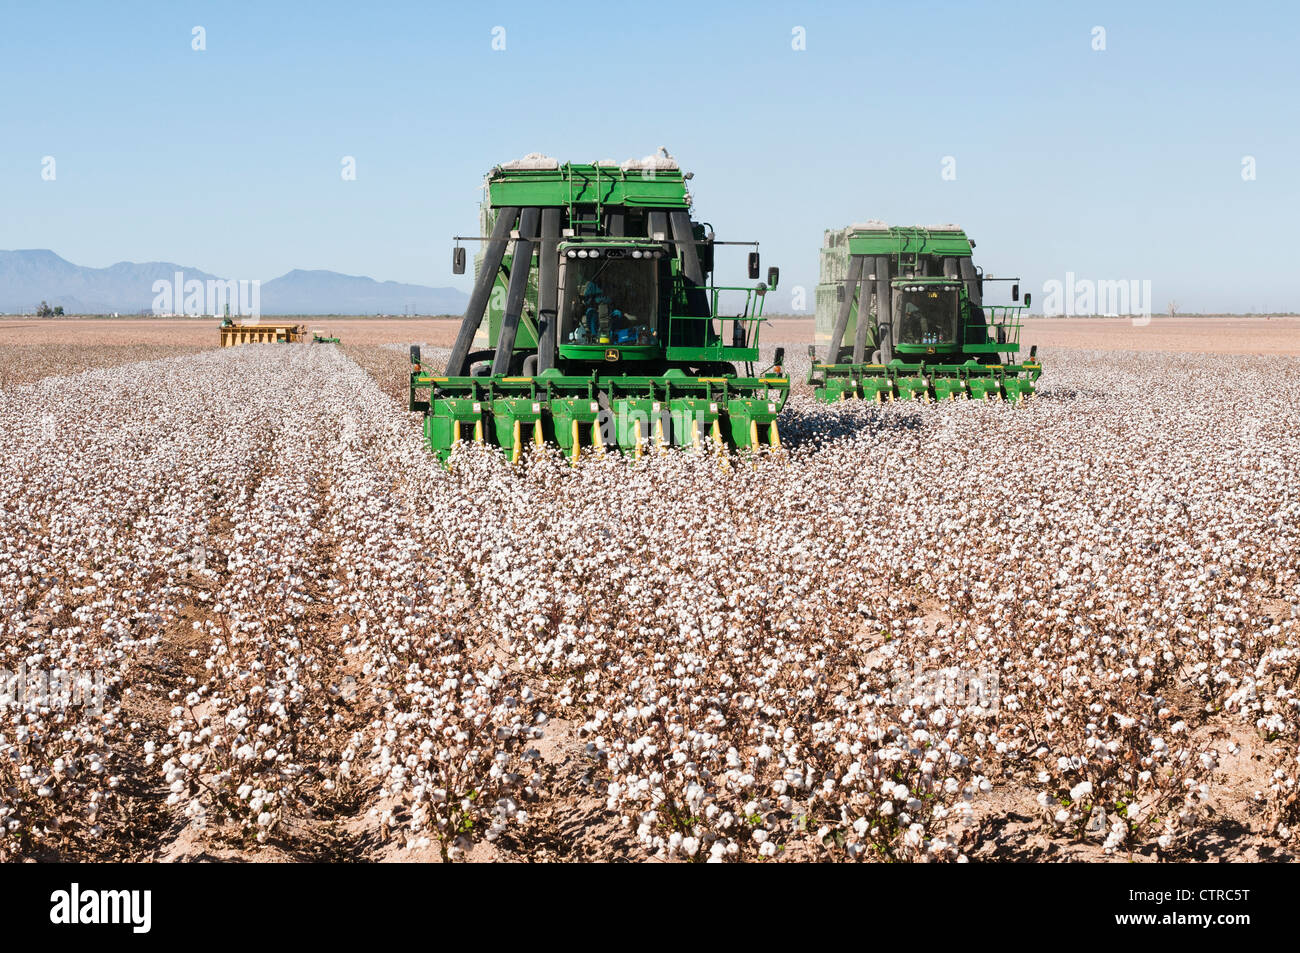 A pair of cotton picking machines harvest a cotton field in Arizona. A module packing machine is shown in the background. Stock Photo